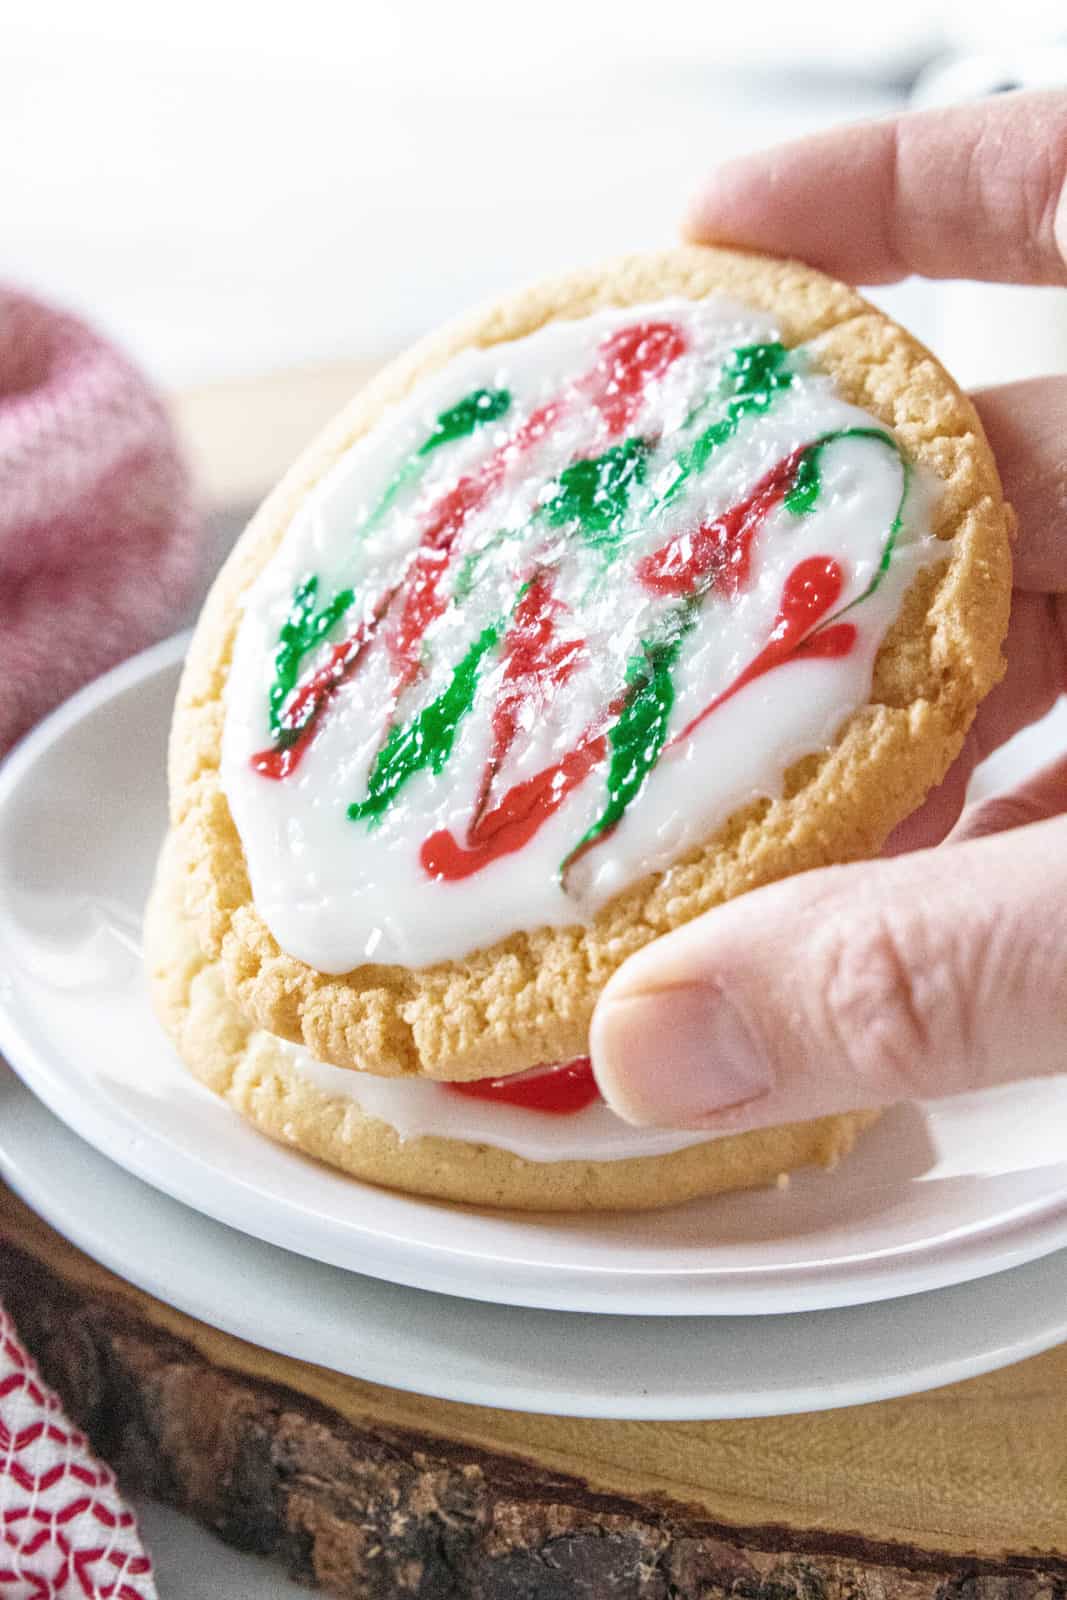 A hand picking up a frosted sugar cookie from a white plate with a stack of cookies. 